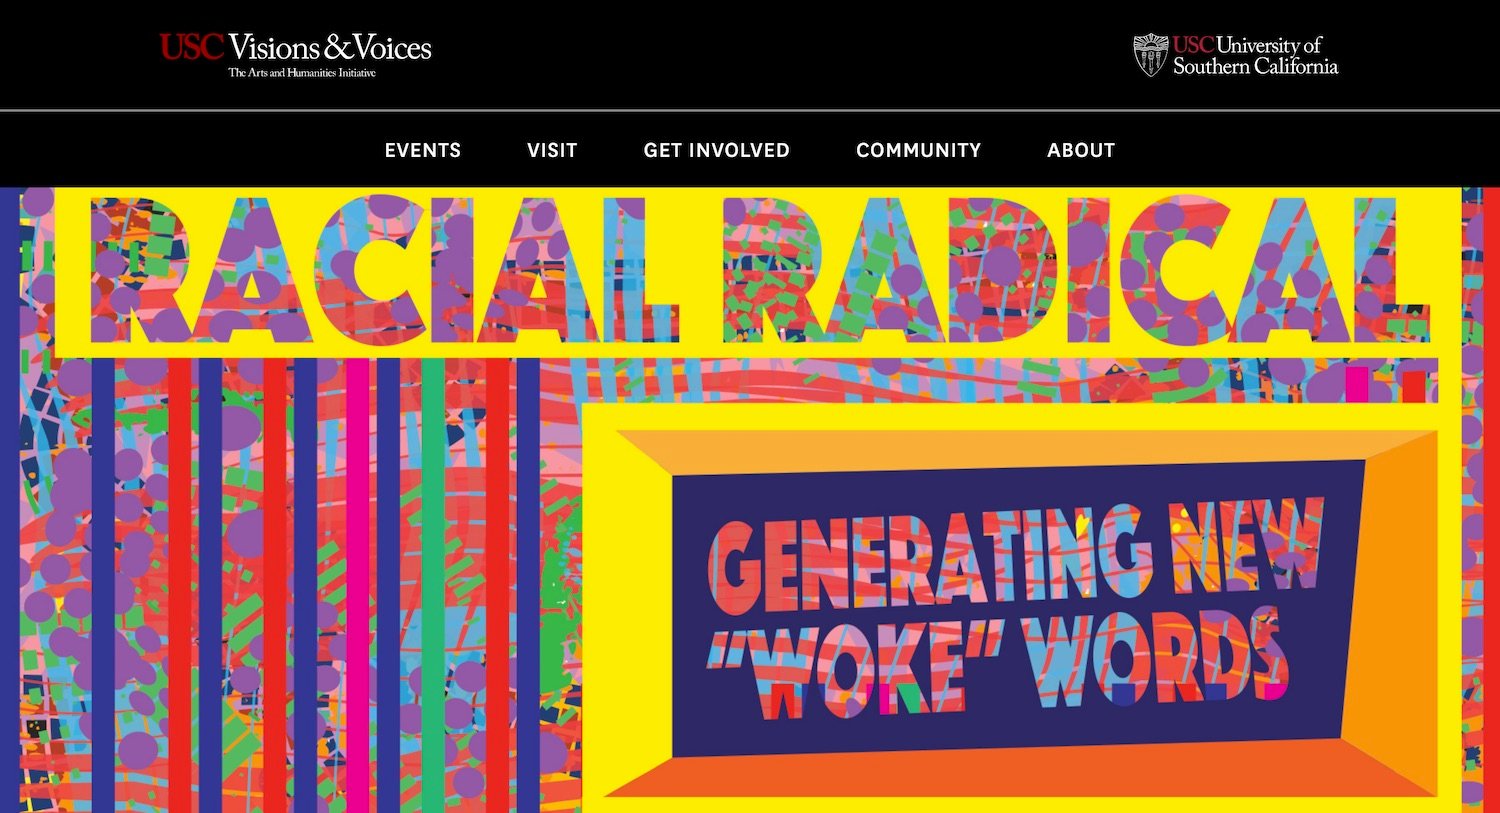 USC Visions & Voices Website - Higher Education Marketing Agency Los Angeles